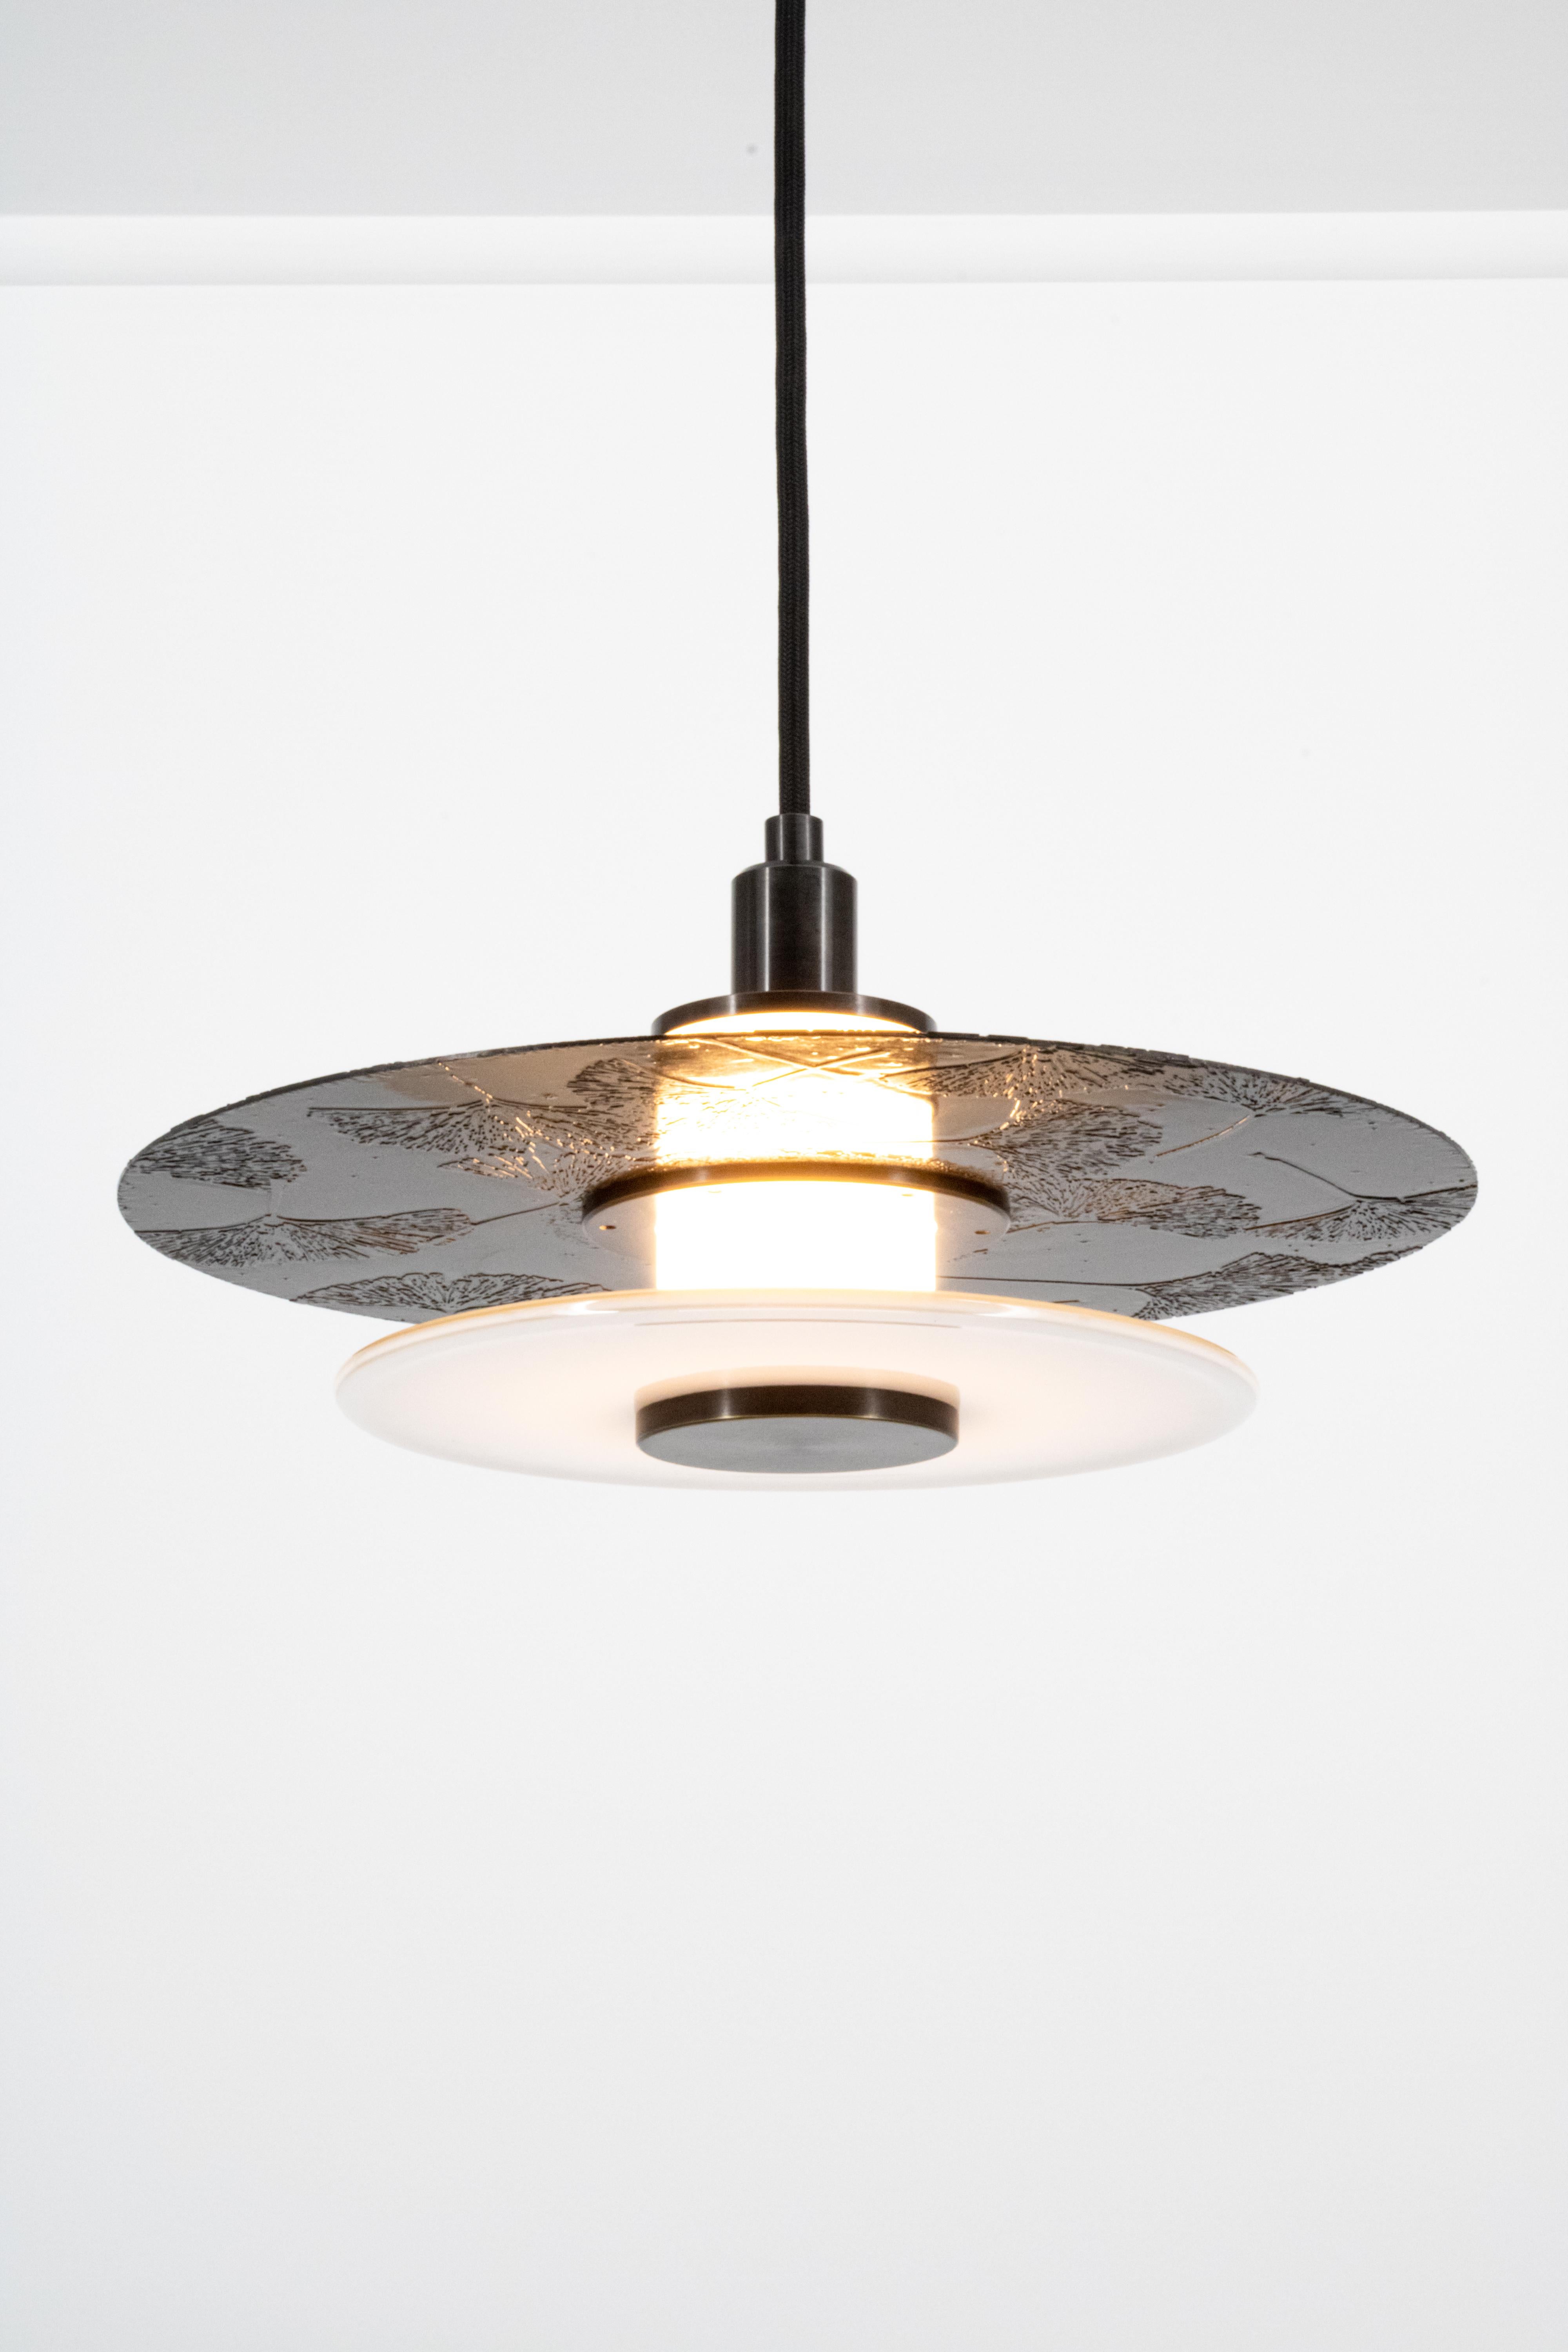 Klein Pendant w/ Milk Glass, Etched Ginkgo in Two Tone Blackened Brass For Sale 7